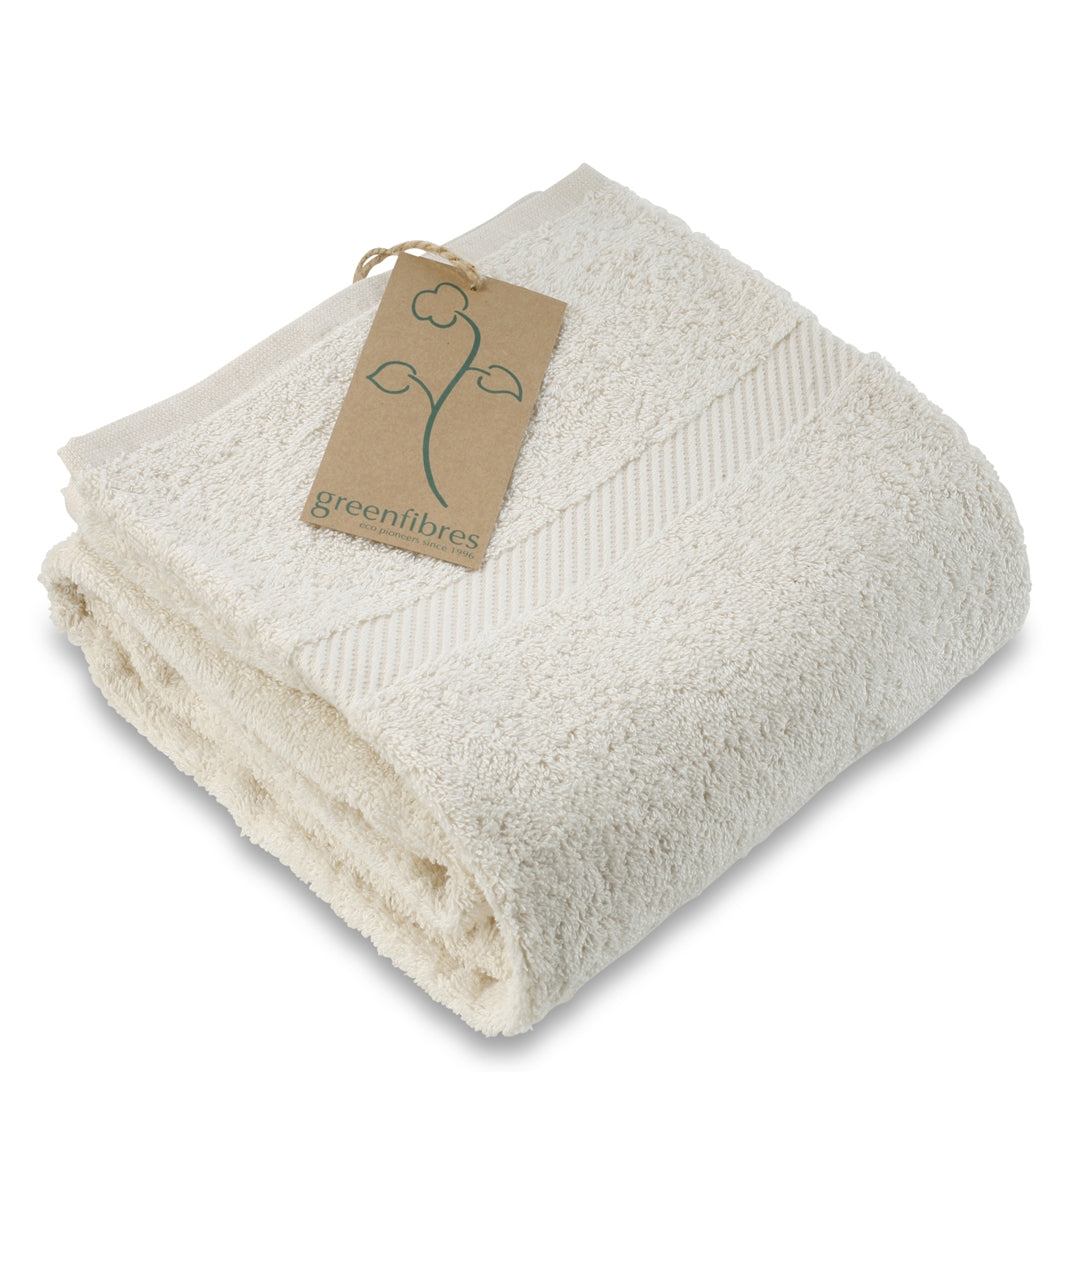 Organic Cotton Terry Shower Towel (70cm x 140cm) | Greenfibres | Raw Living UK | House &amp; Home | Bath &amp; Shower | Beauty | Greenfibres Organic Cotton Terry Shower Towel (70cm x 140cm): soft and absorbent 100% organic cotton. Undyed &amp; unbleached. Generous 600 g/m2 weight.